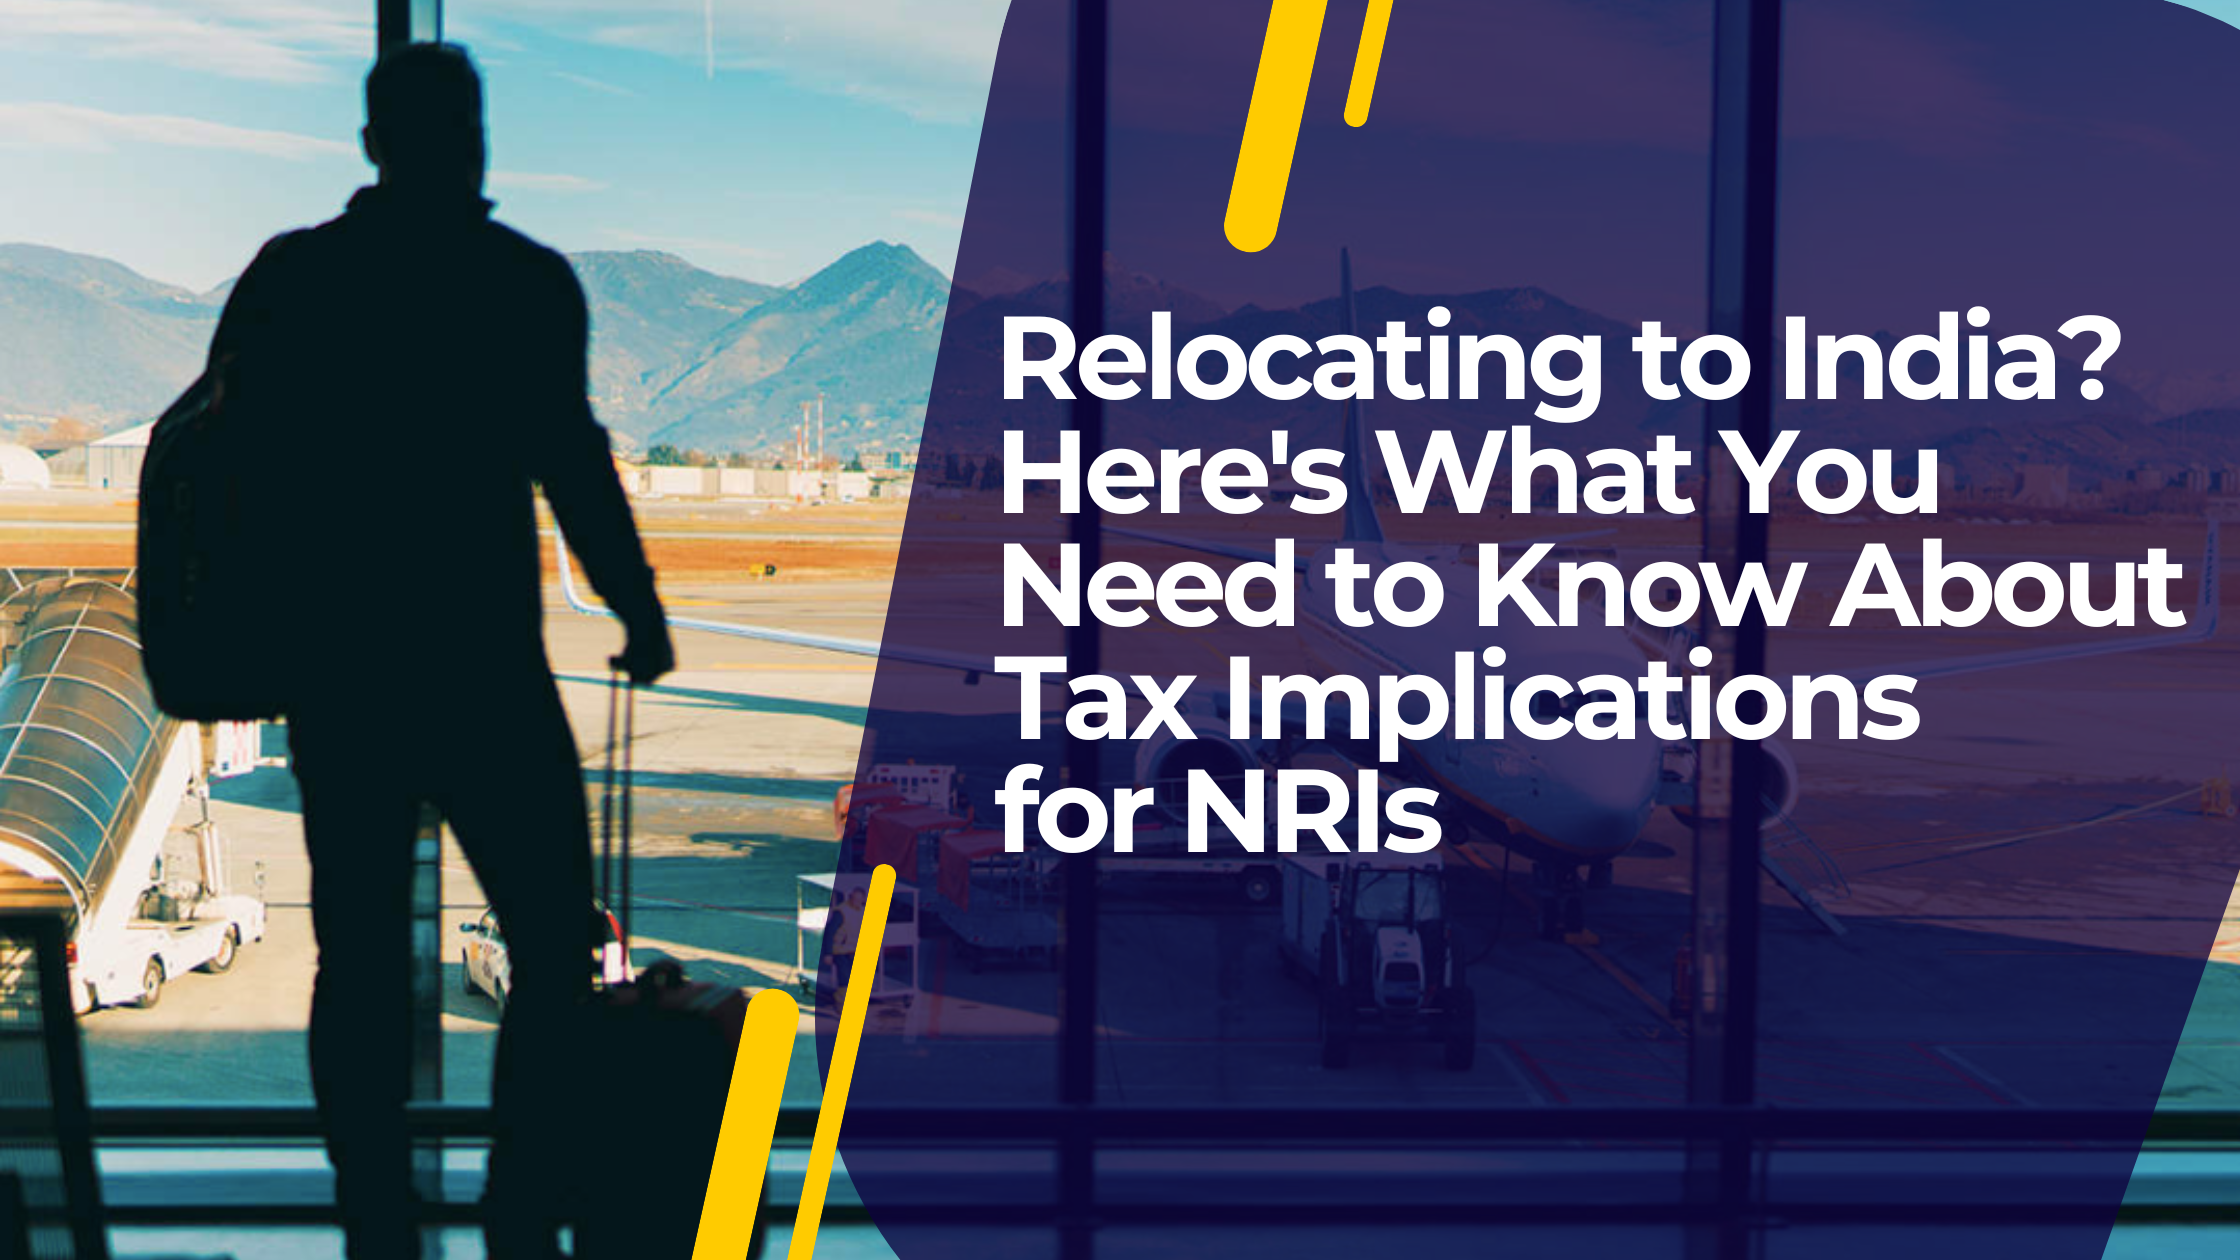 Relocating to India? Here's What You Need to Know About NRI Taxation 